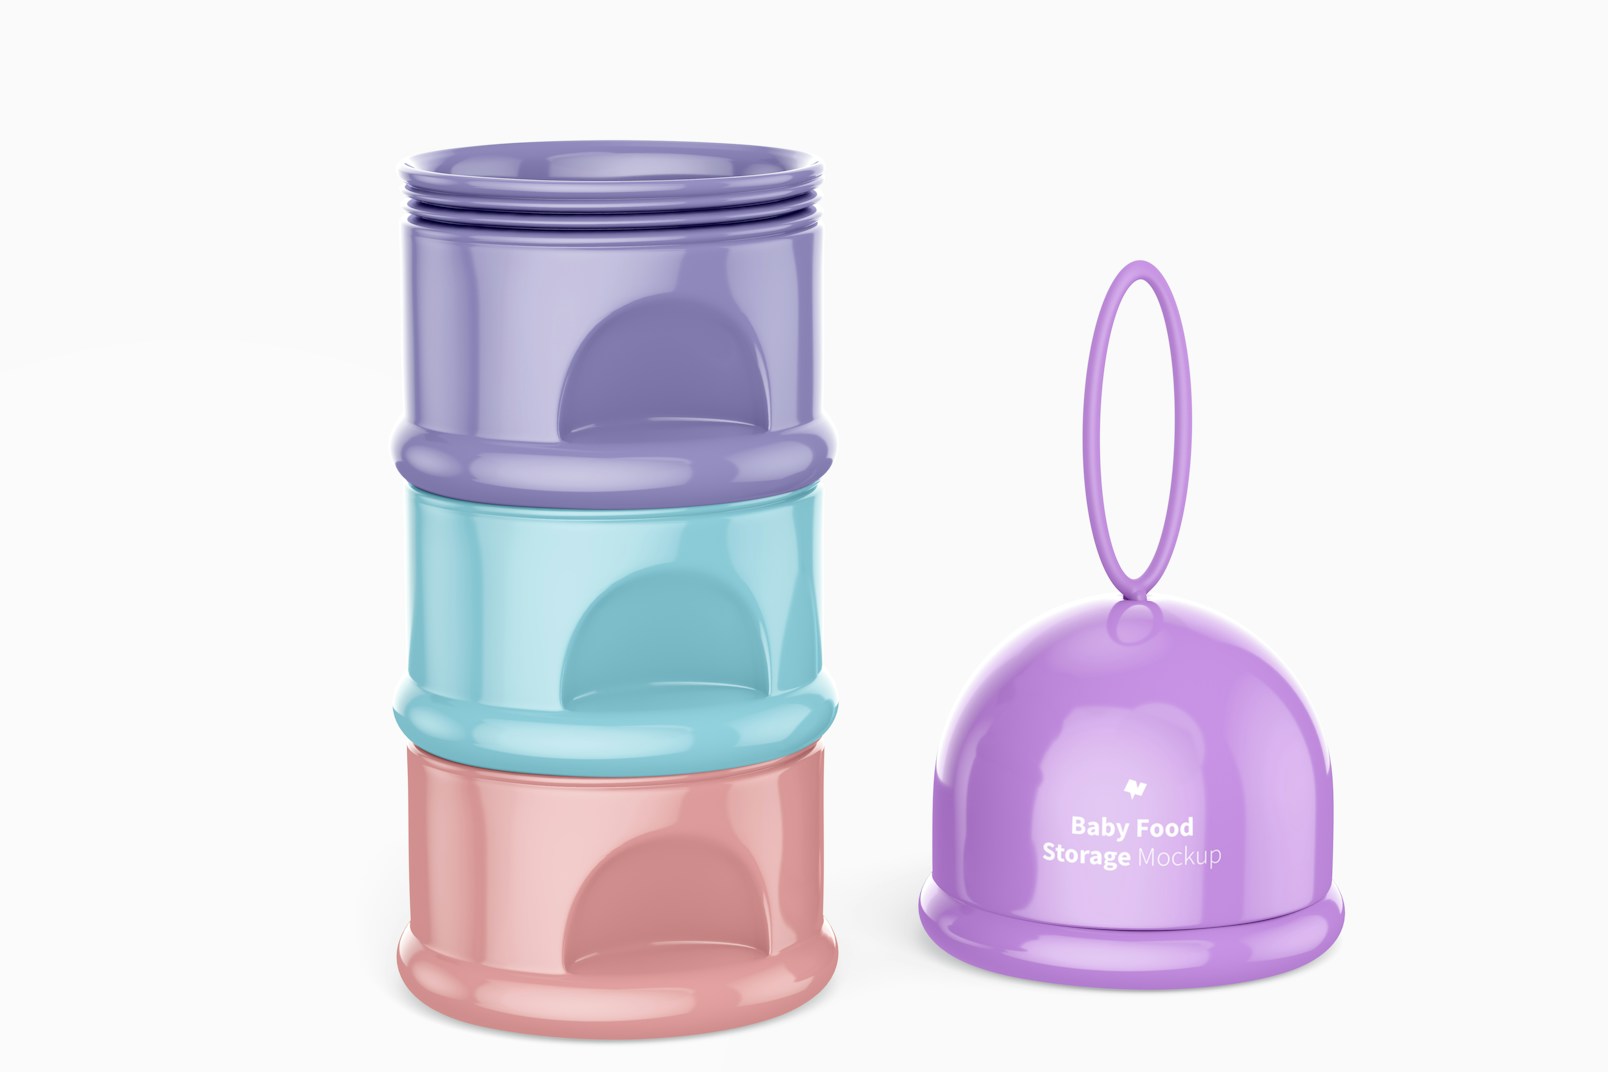 Baby Food Portable Storage Mockup, Front View